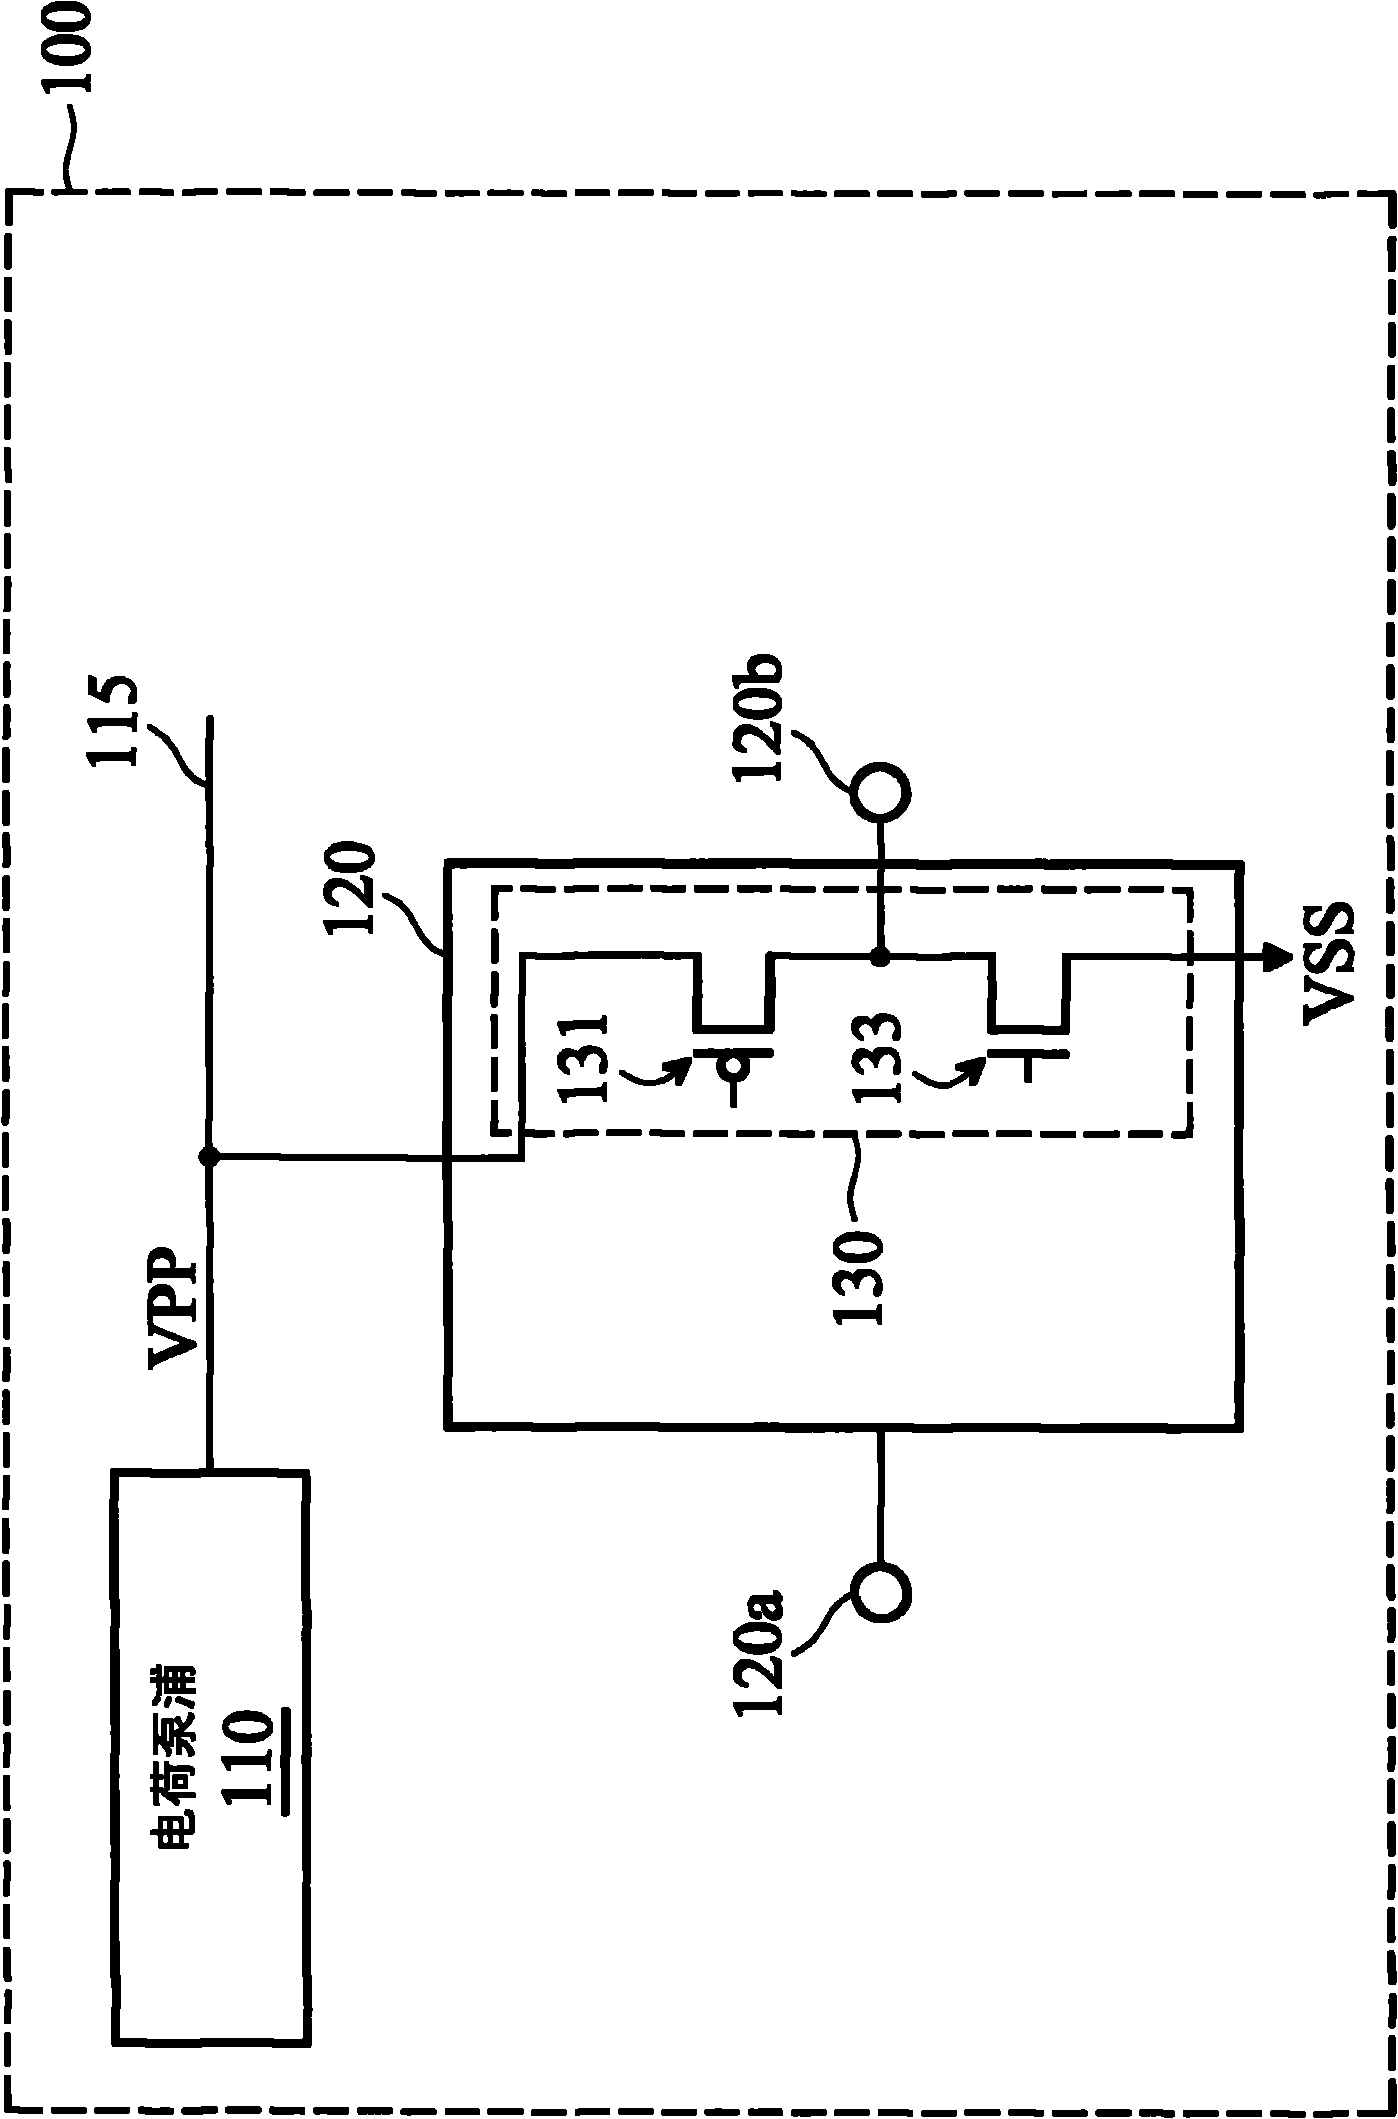 Level shifters, integrated circuits, systems, and method for operating the level shifters